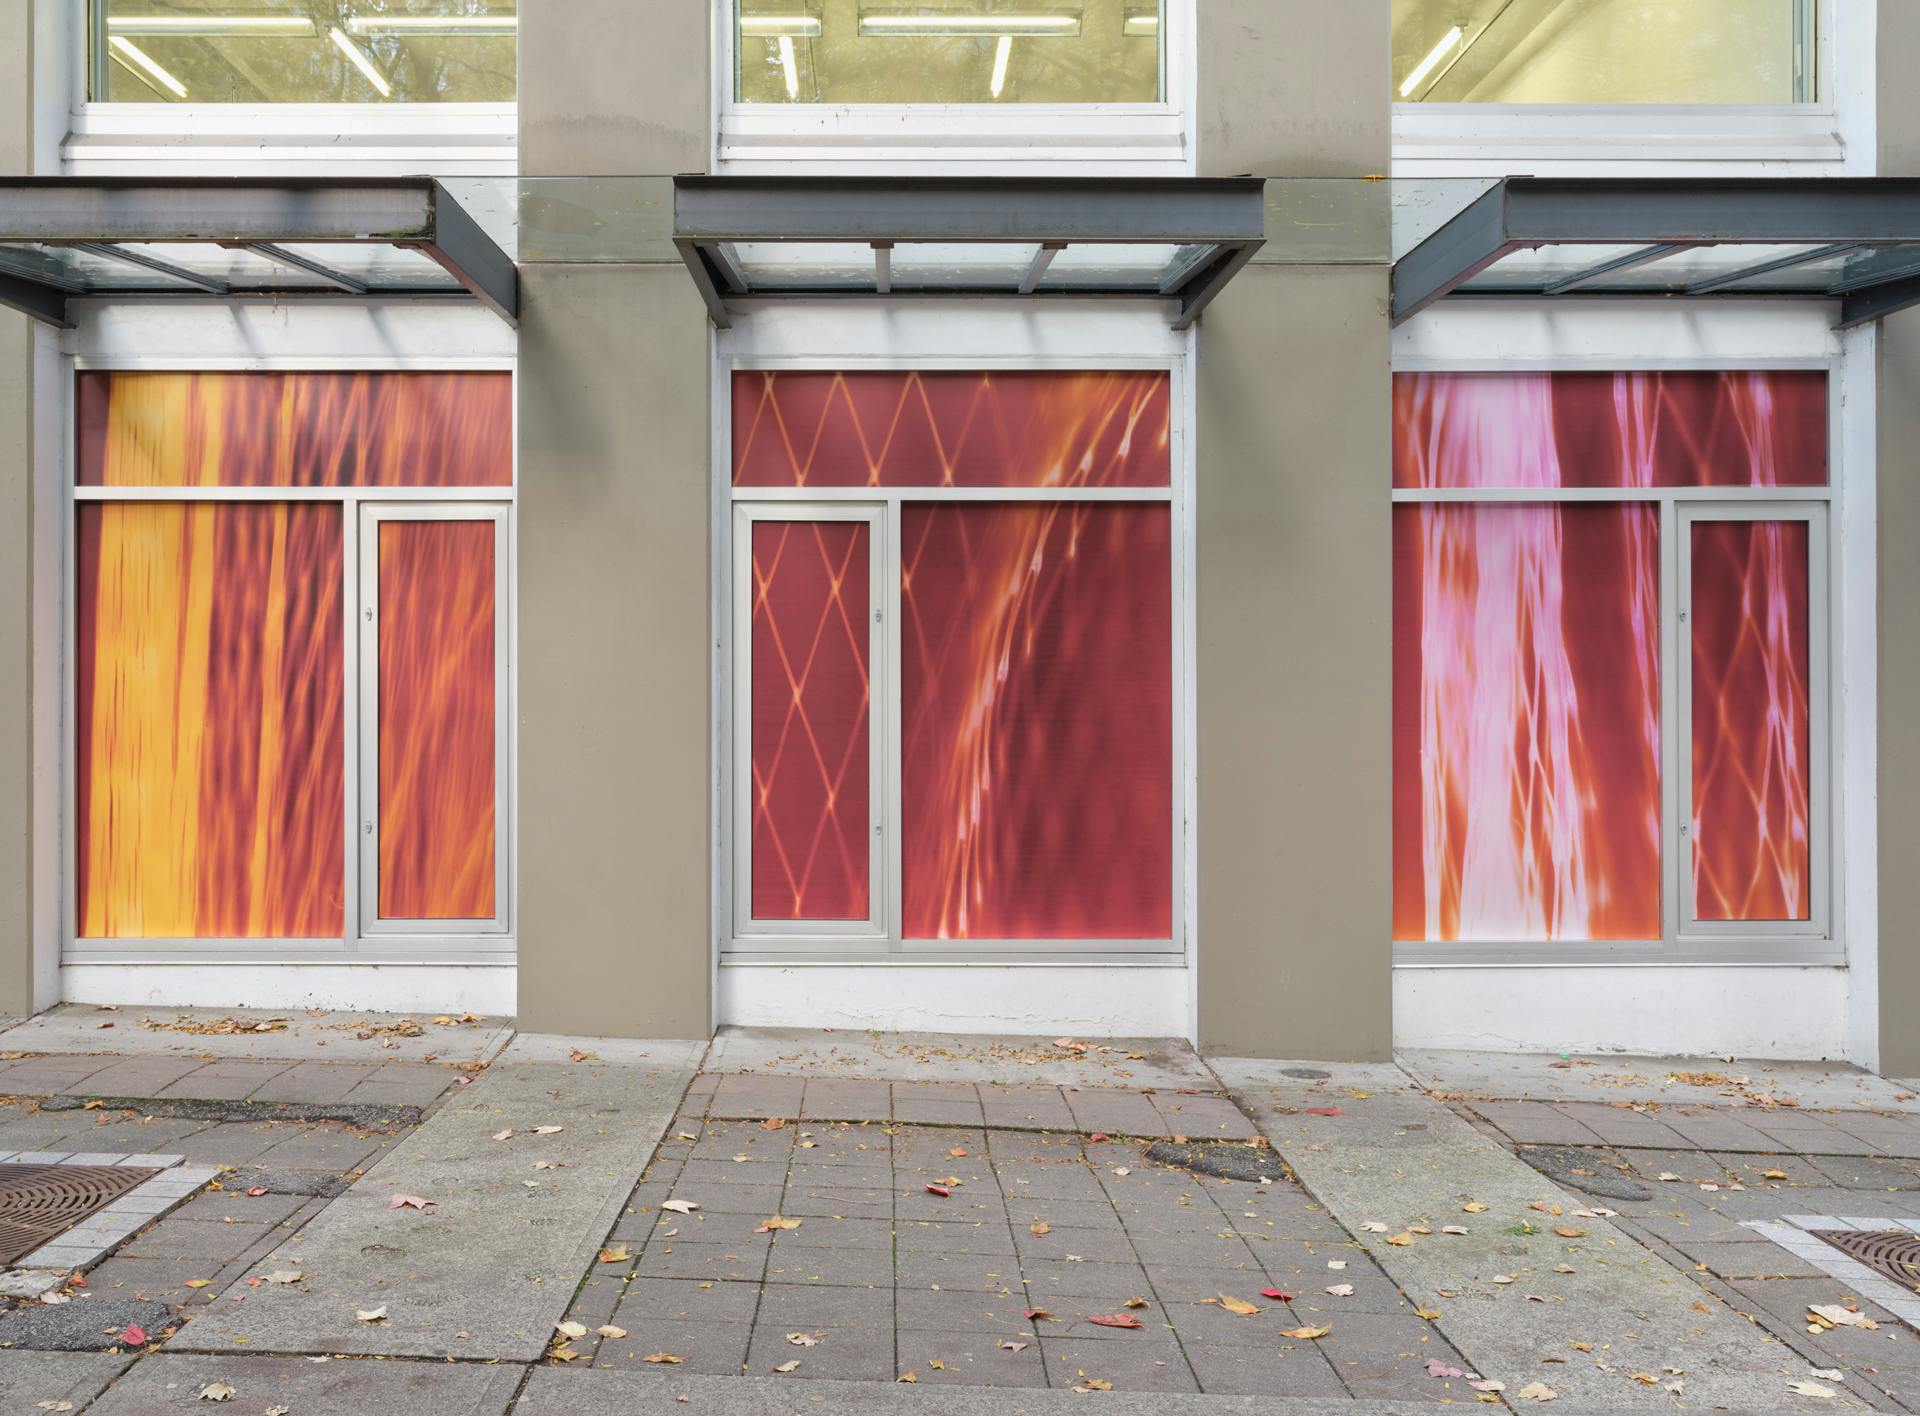 Three windows featuring three photograms depicting nylon mesh produce bags against neon photographic paper. From left to right the photograms colours' vary from orange to pink and red.